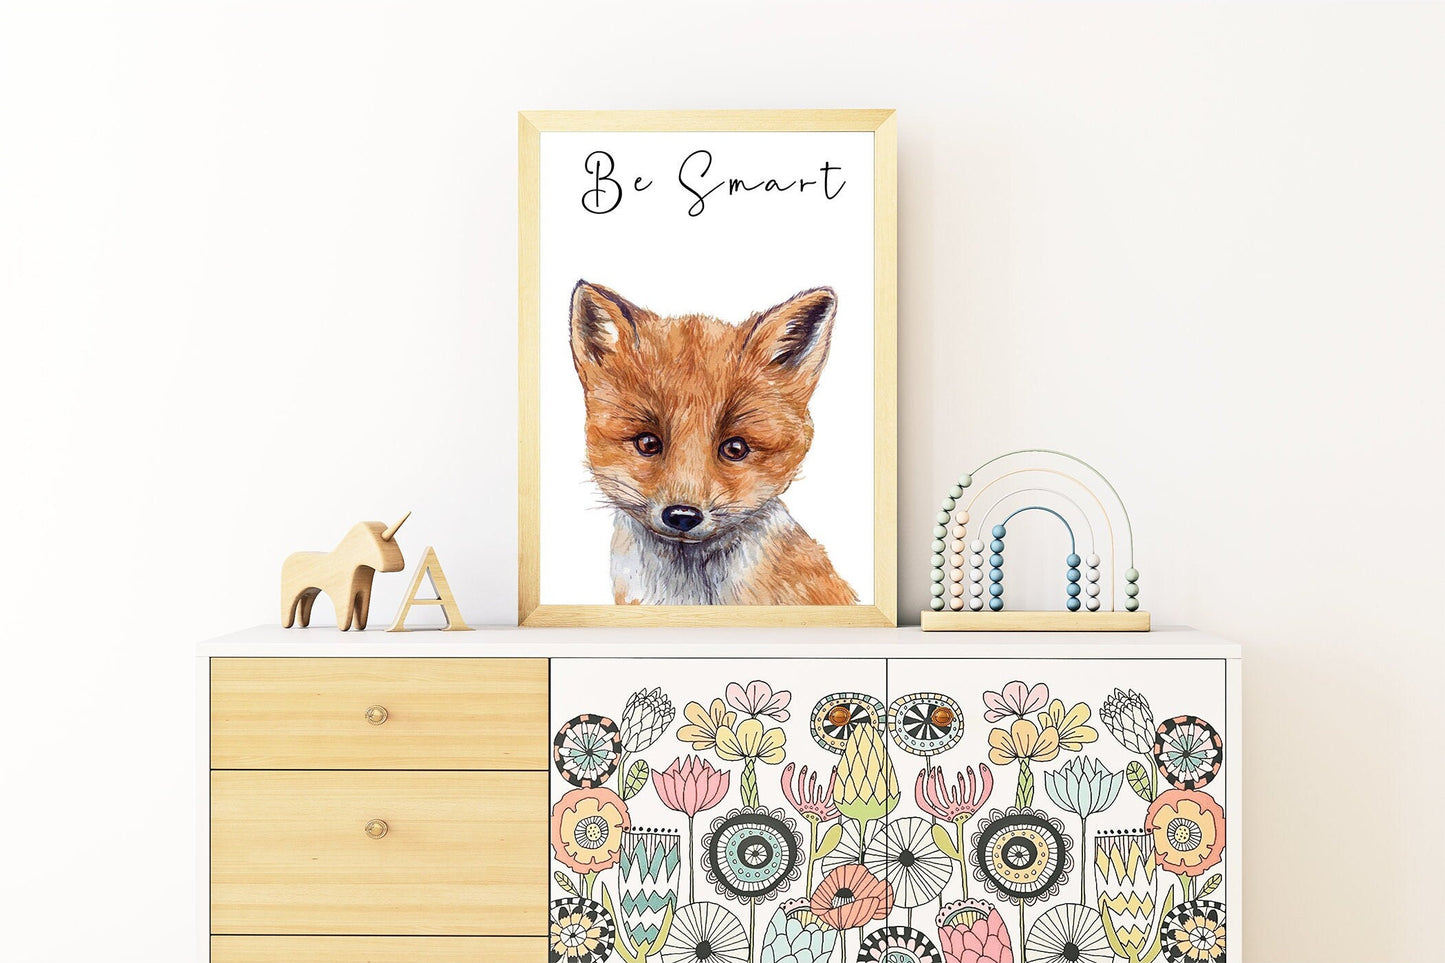 Children's be kind prints | Set of 3 | baby animal portraits | Choose your own safari pictures | A3 | Square | A4 | A5